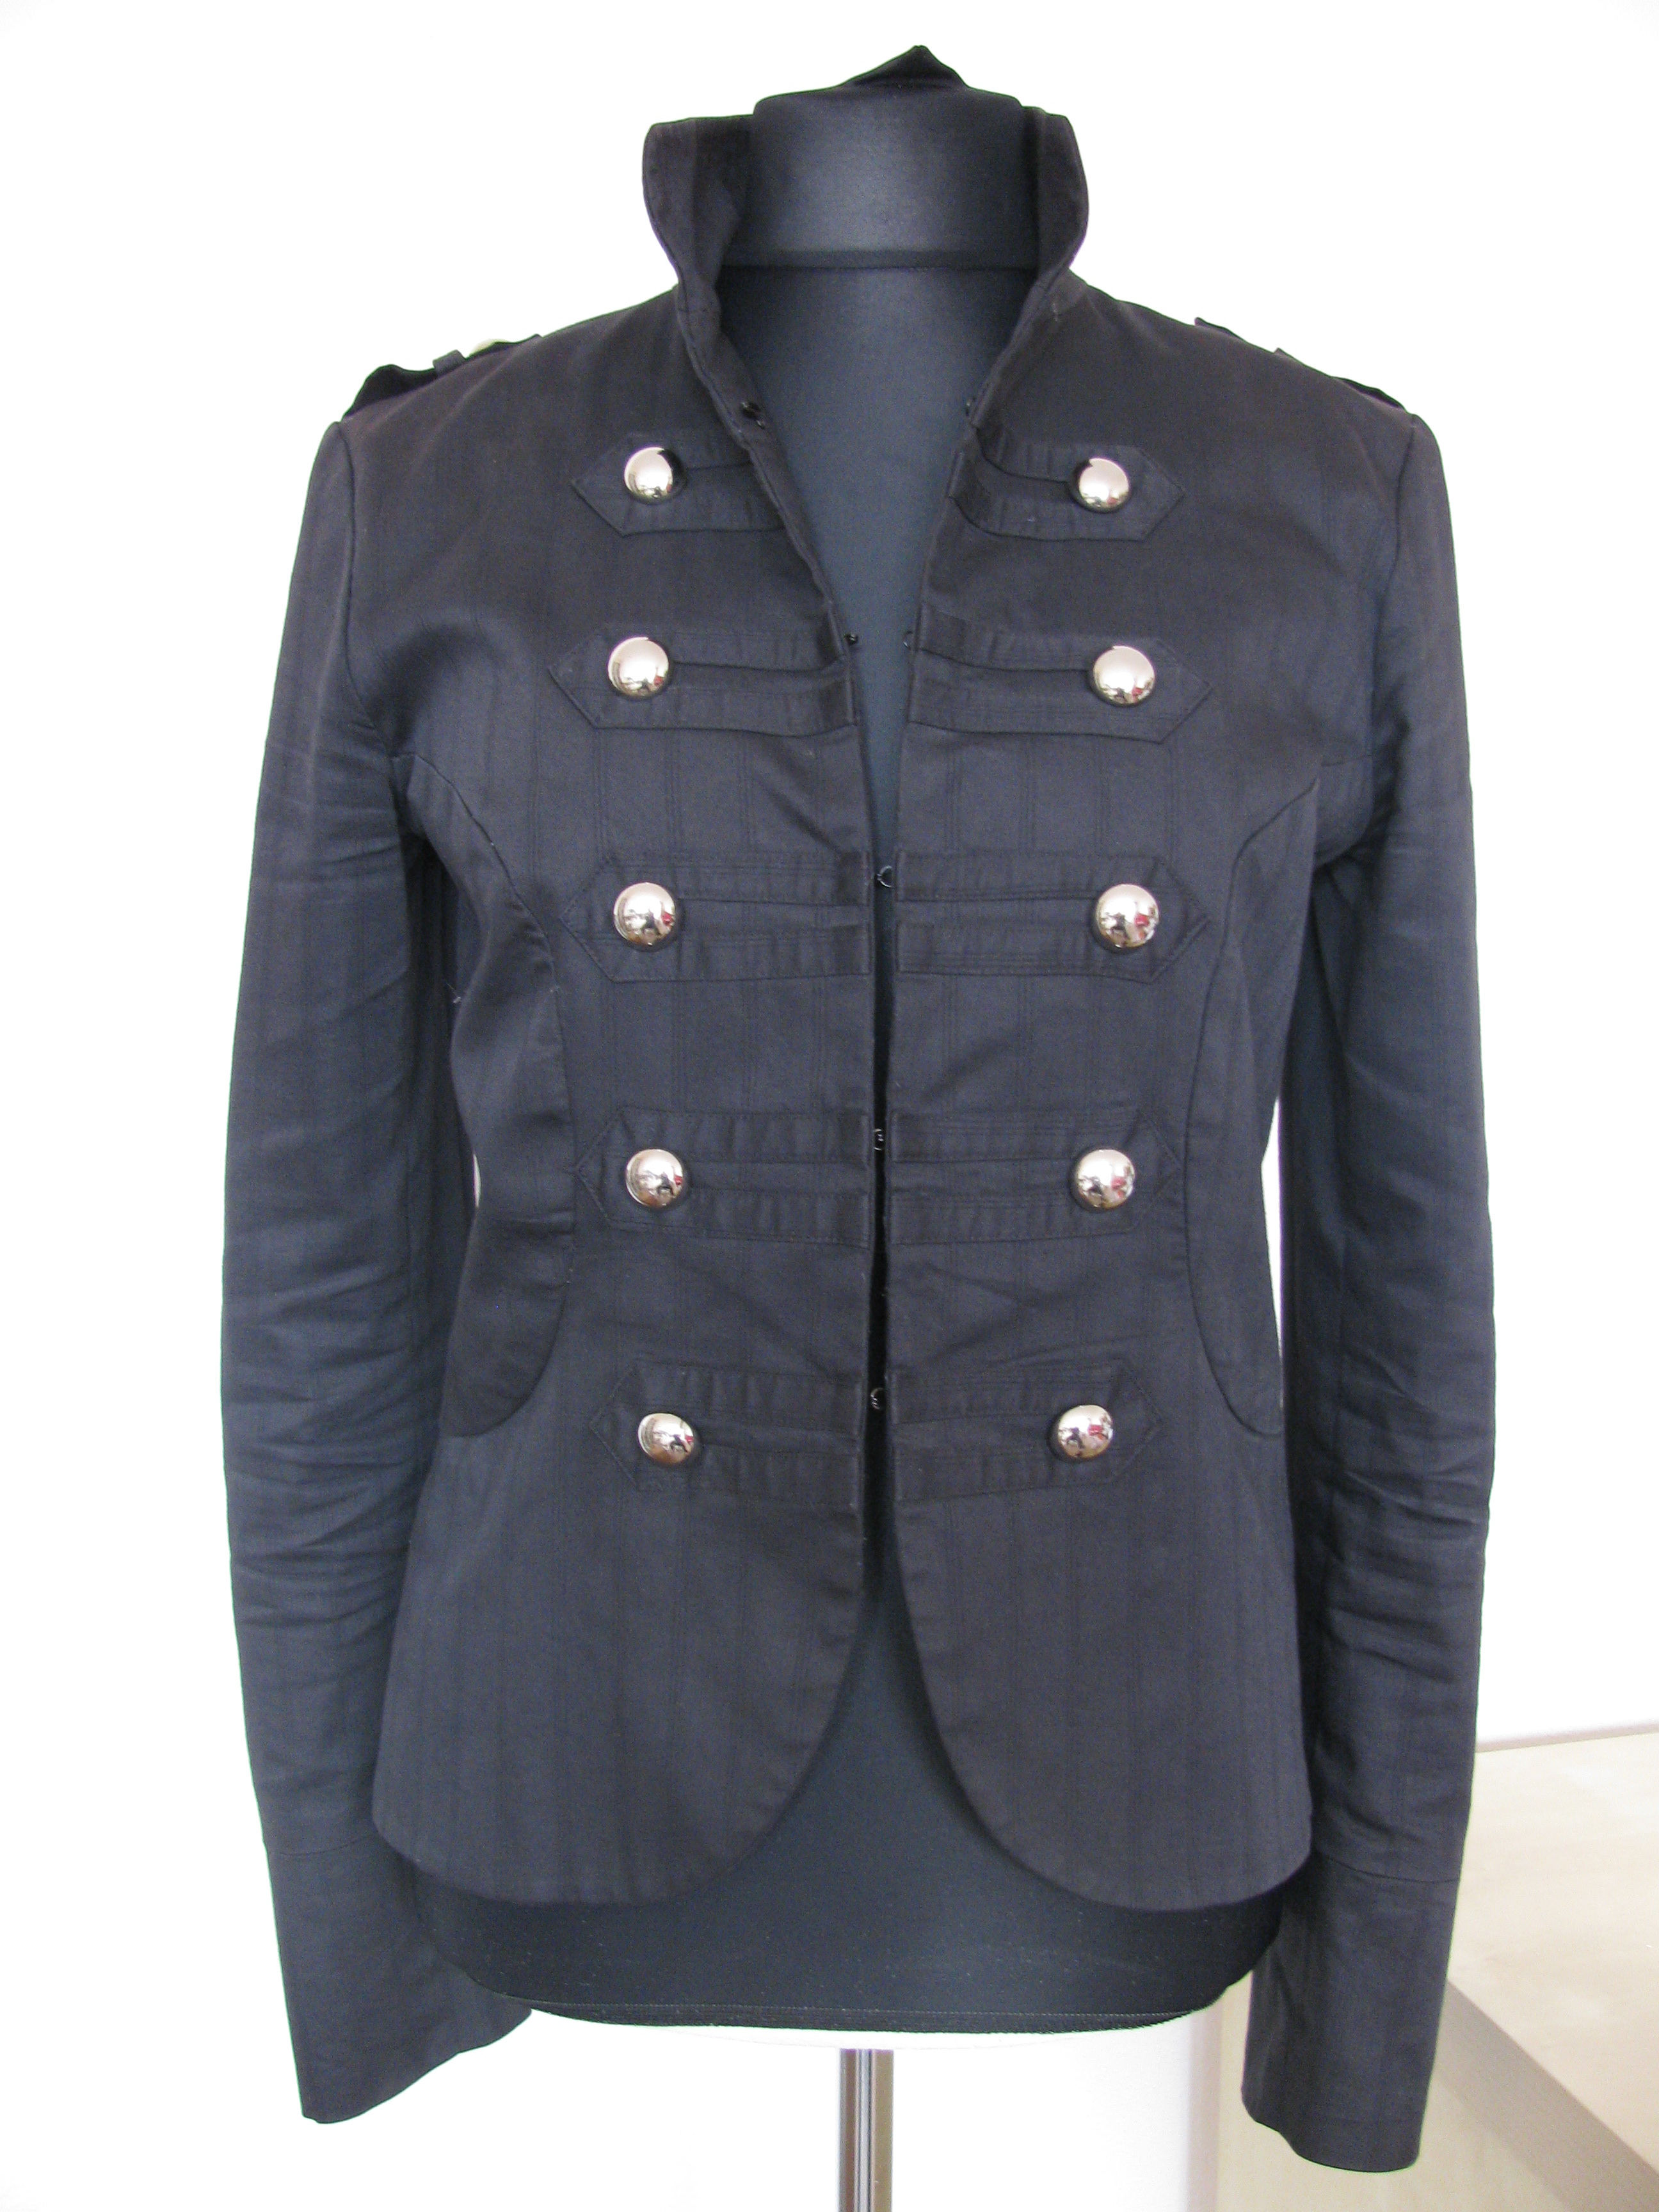 Soldier jacket – Sewing Projects | BurdaStyle.com